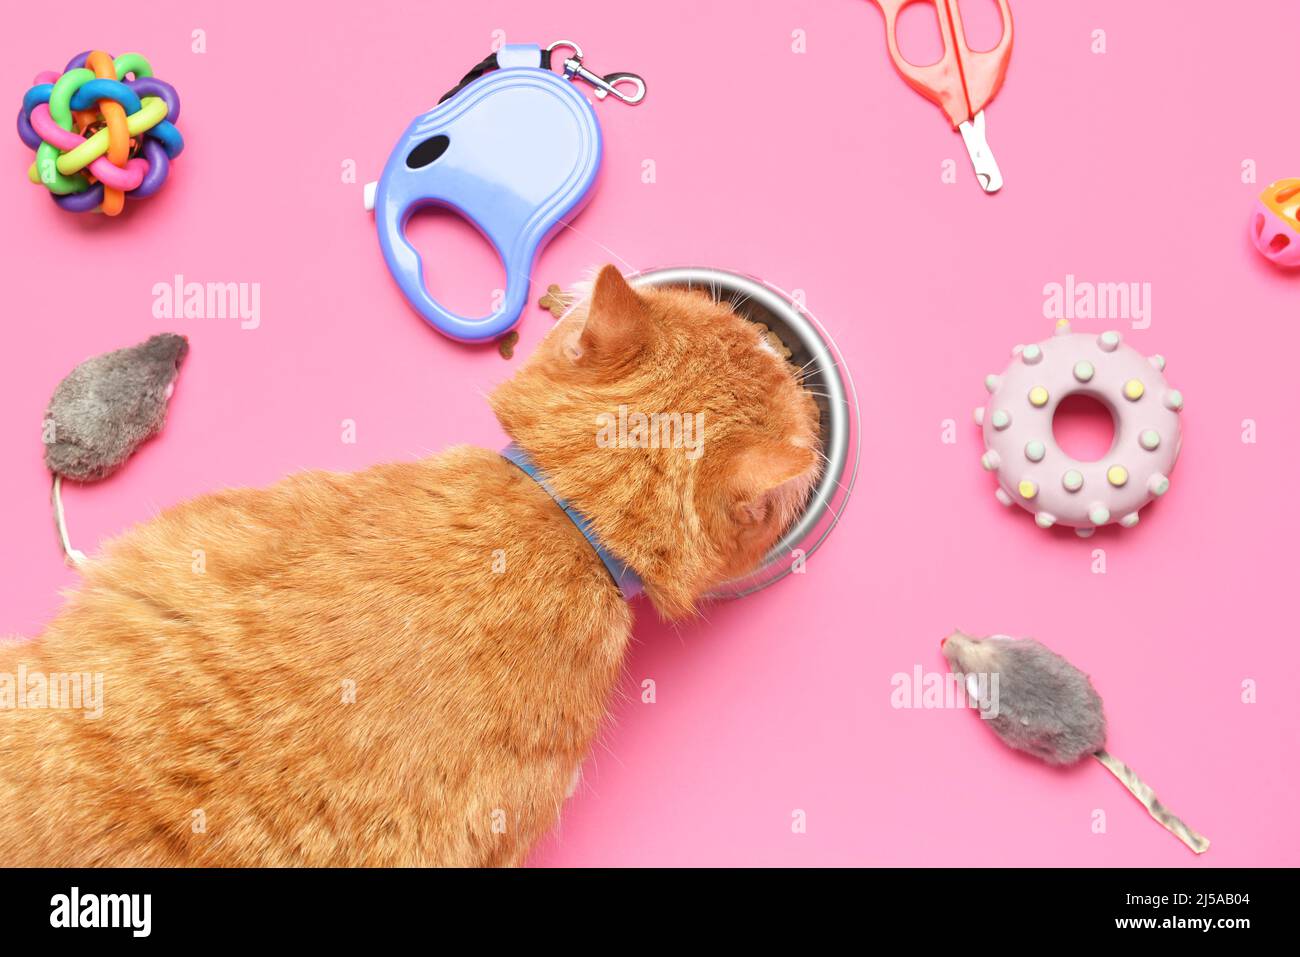 Cute cat eating dry food on pink background Stock Photo